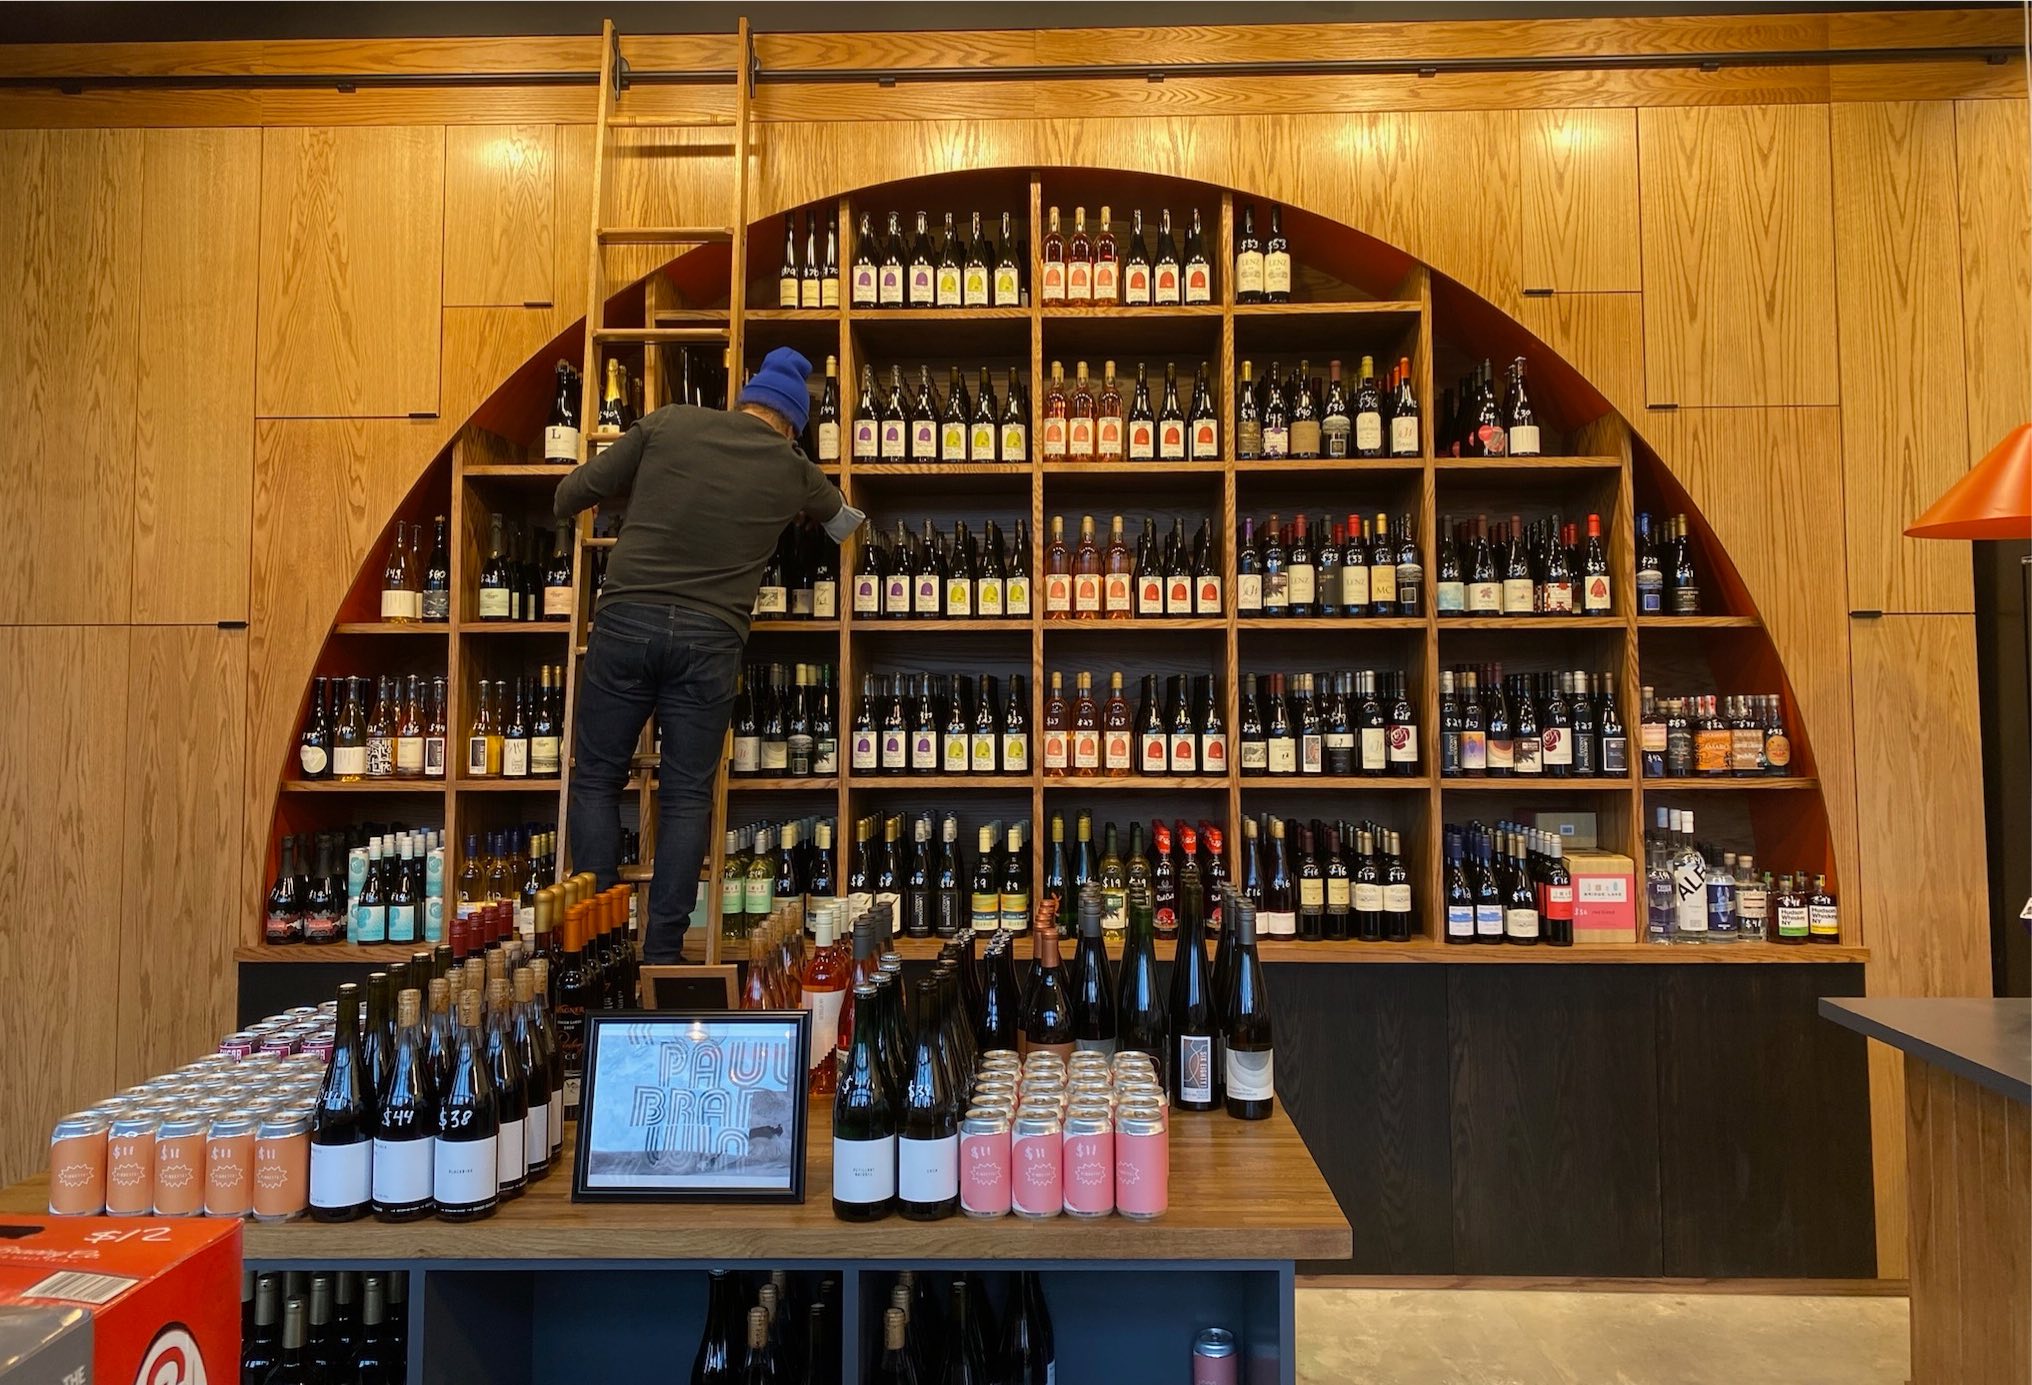 The bar and shop at Paul Brady Wine in Beacon, NY will feature an array of New York state wines and craft beverages. Find details and online store at PaulBradyWine.com.